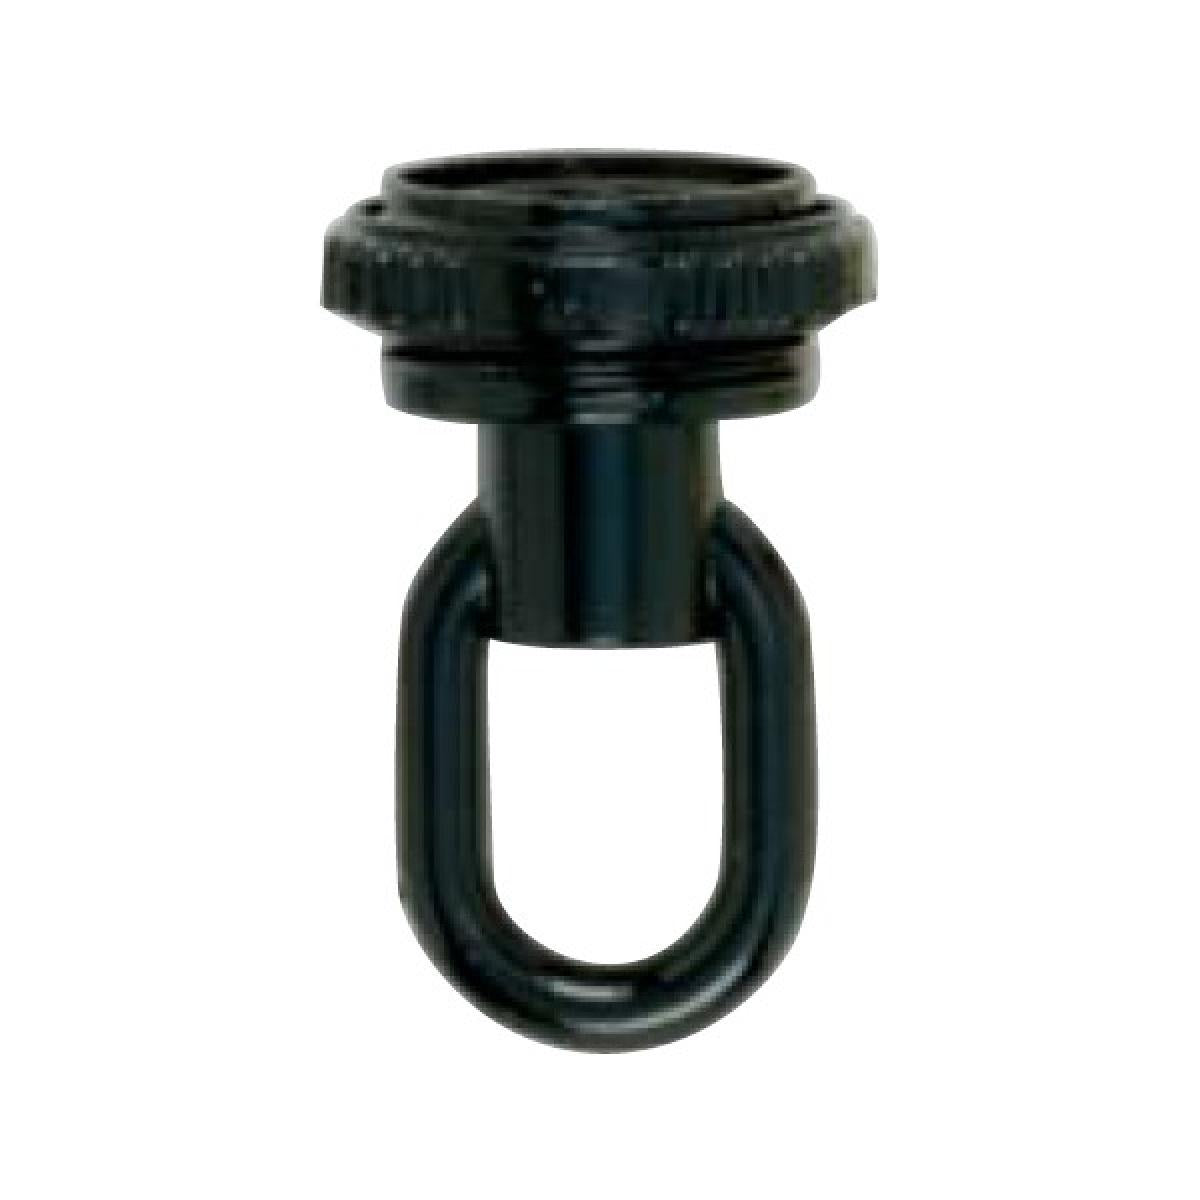 Satco 90-2421 1/8 IP Screw Collar Loop With Ring 25lbs Max Glossy Black Finish